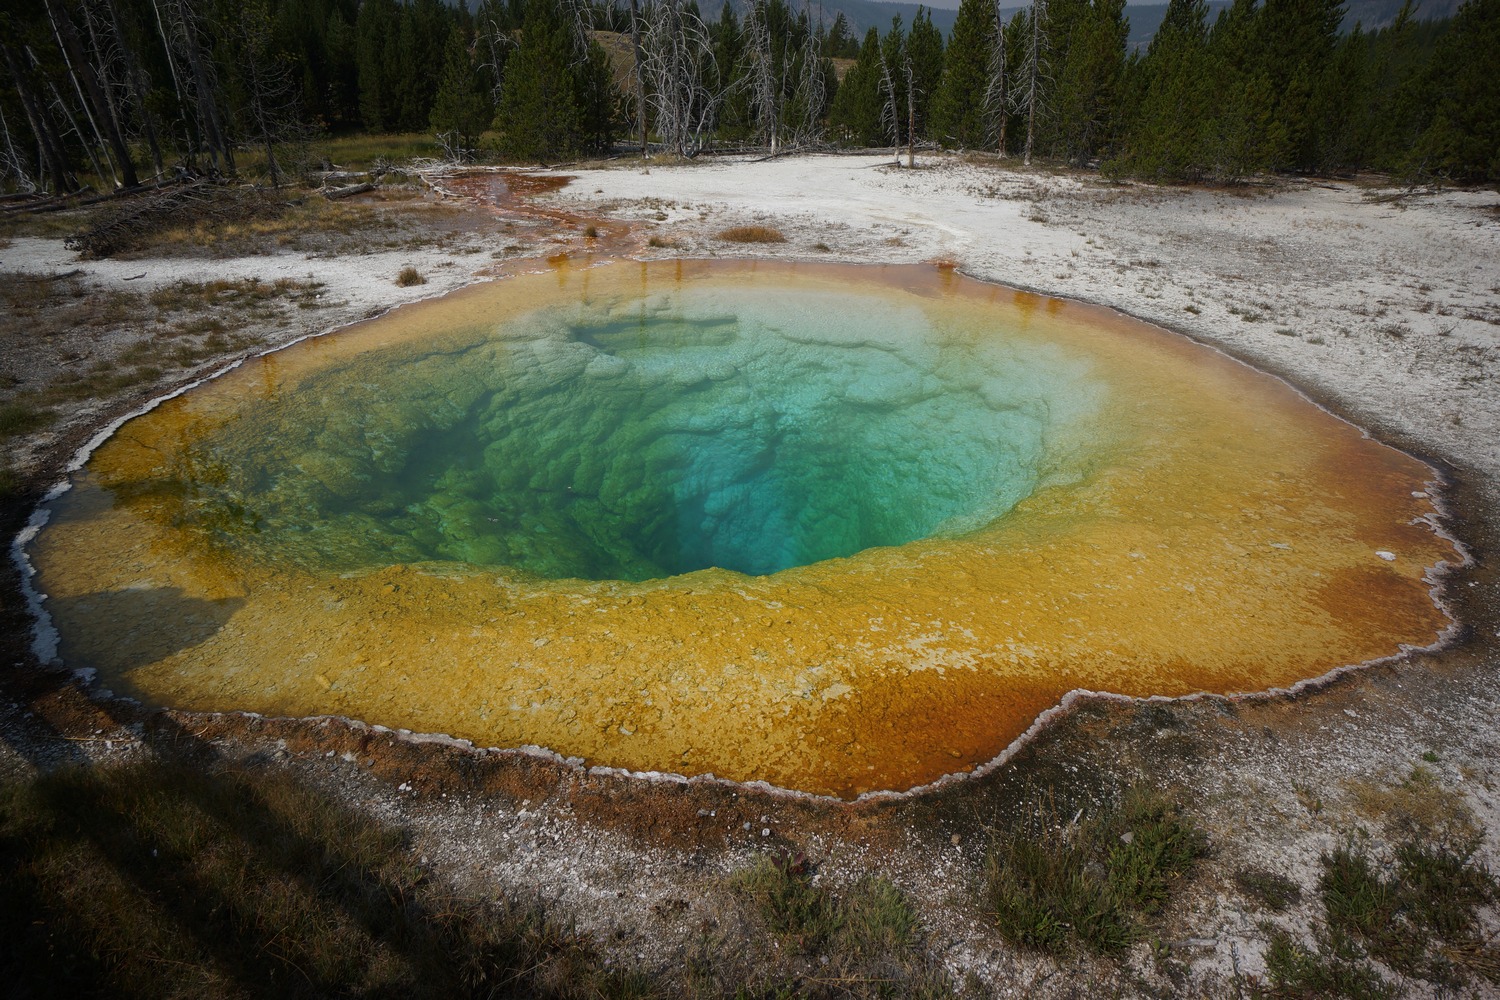 yellowstone pools hike on the continental divide trail 2018